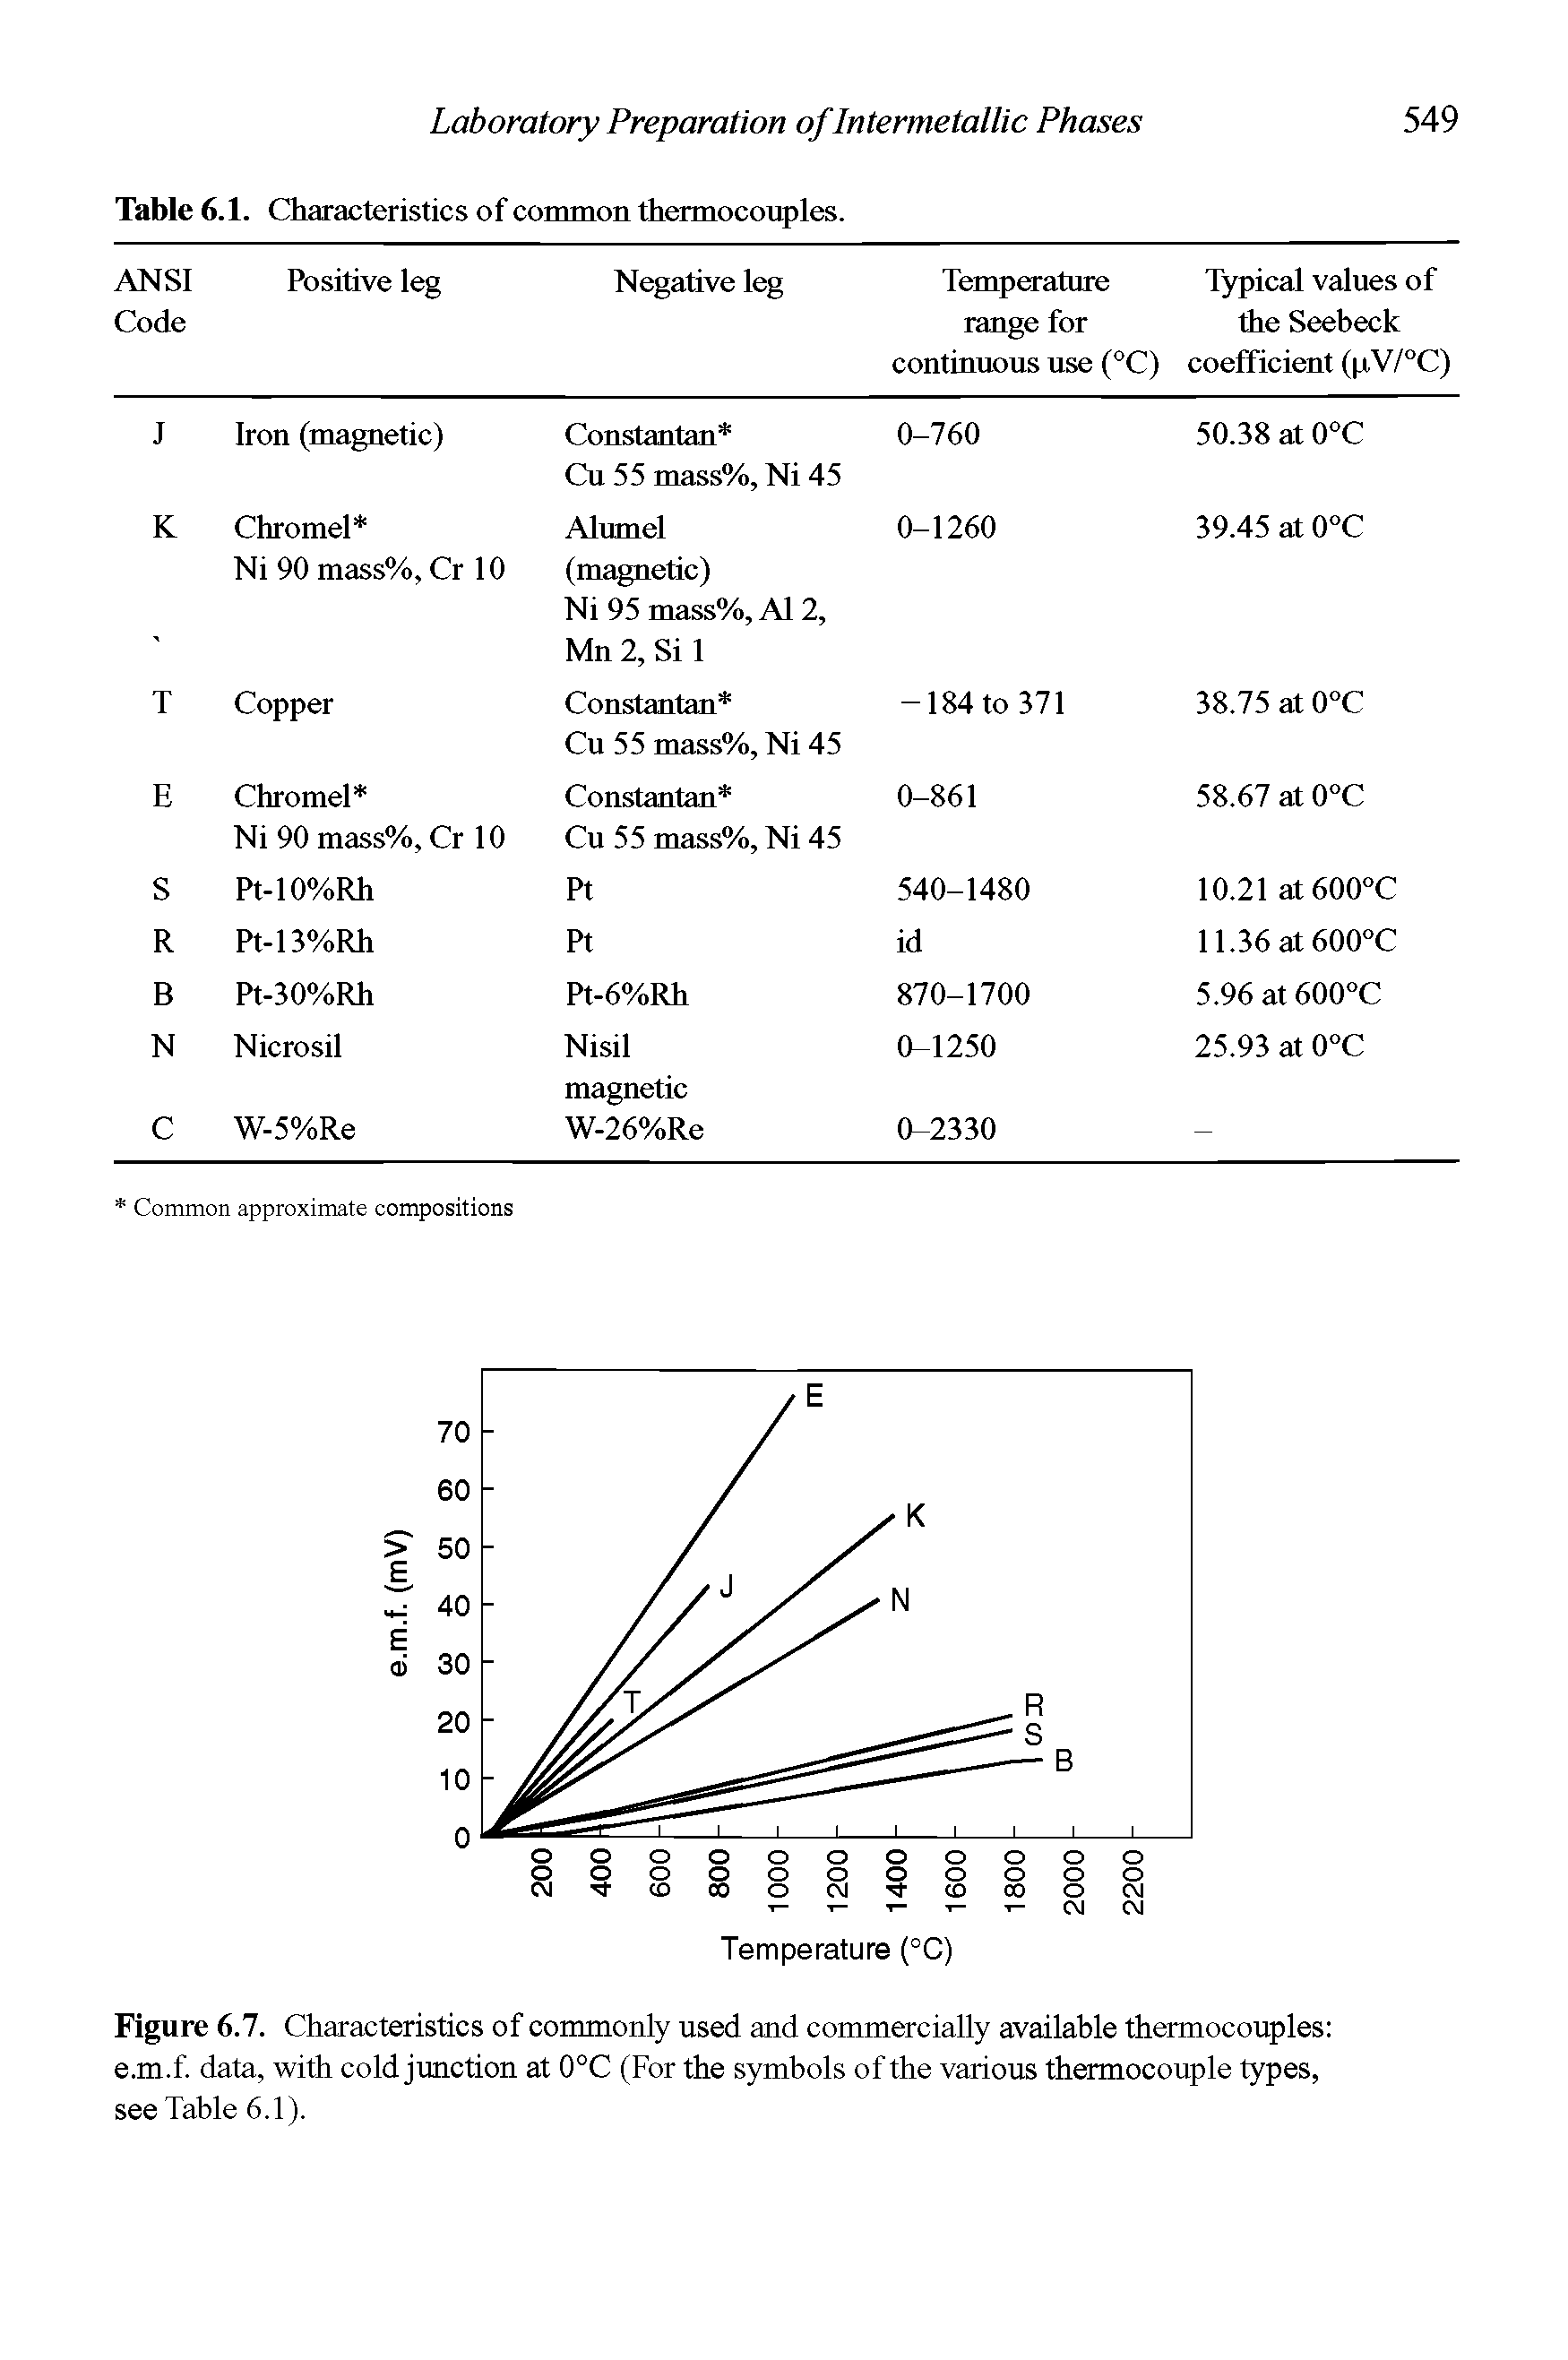 Figure 6.7. Characteristics of commonly used and commercially available thermocouples e.m.f. data, with cold junction at 0°C (For the symbols of the various thermocouple types, see Table 6.1).